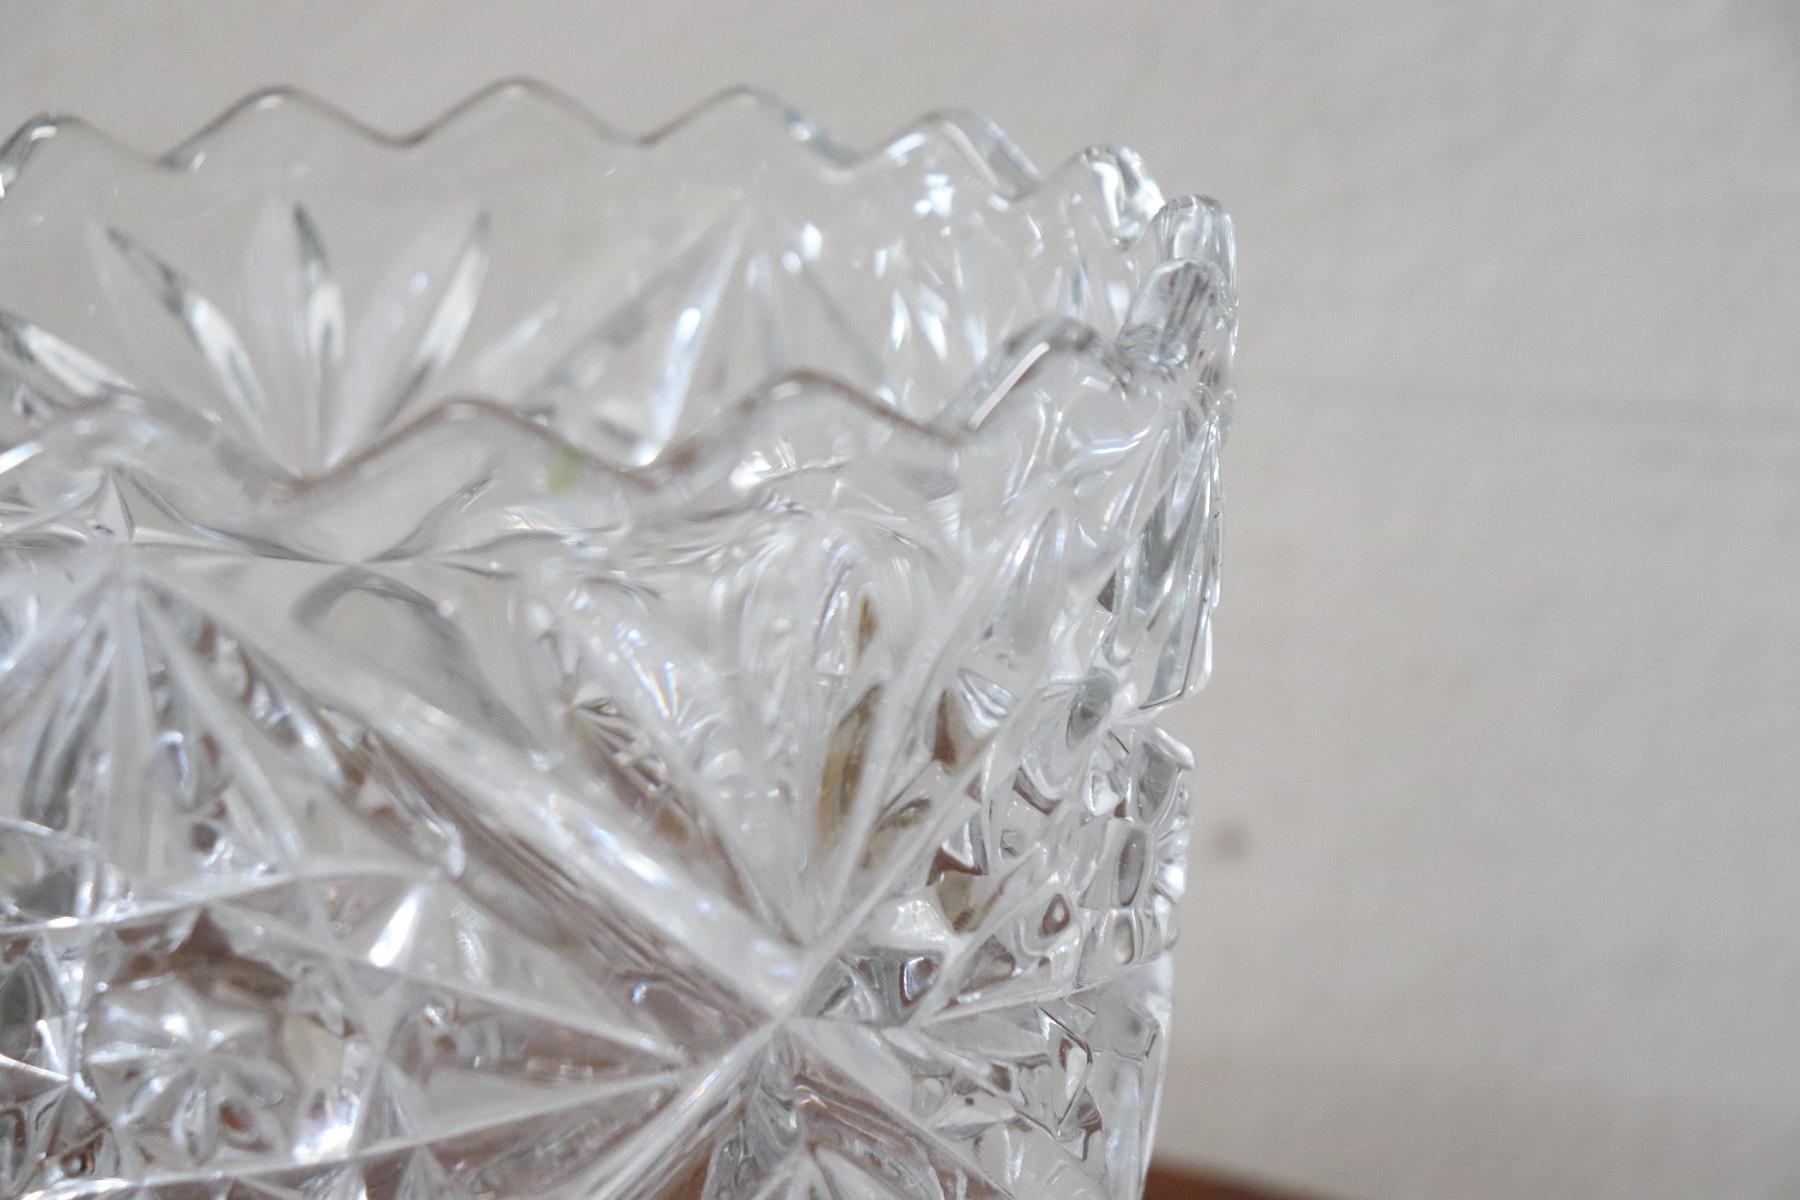 Beautiful large crystal vase. The crystal has a refined workmanship and typical light.